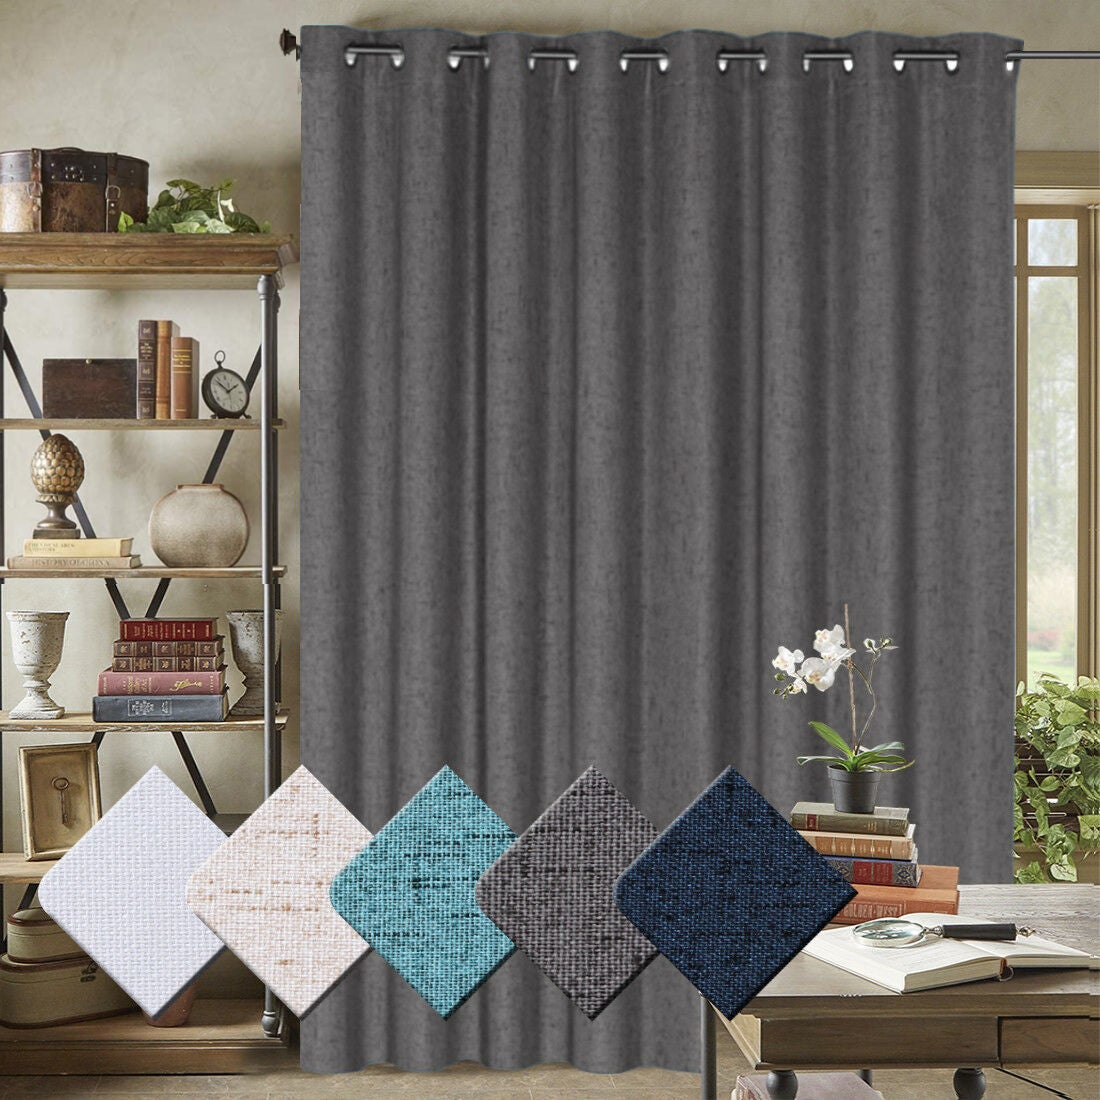 1x Extra Wider 100% Blackout Curtain for Bedroom Linen Textured Blockout Curtain